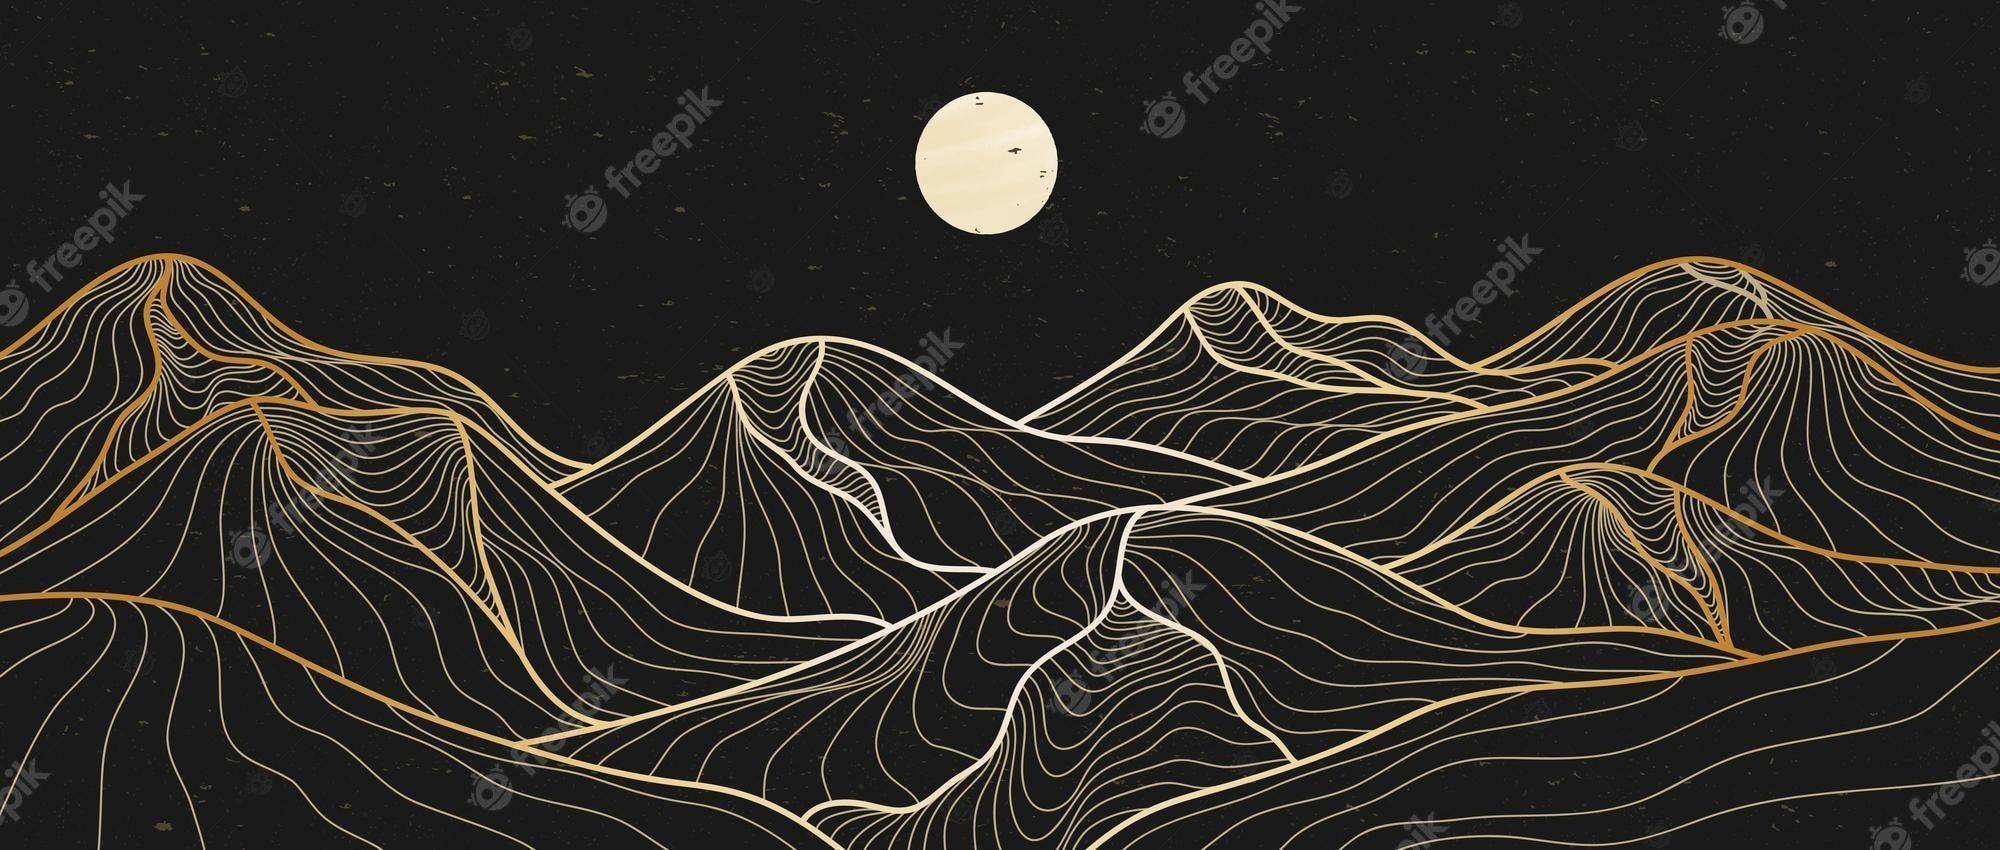 Mountains and clouds in the sky - Modern, illustration, vector